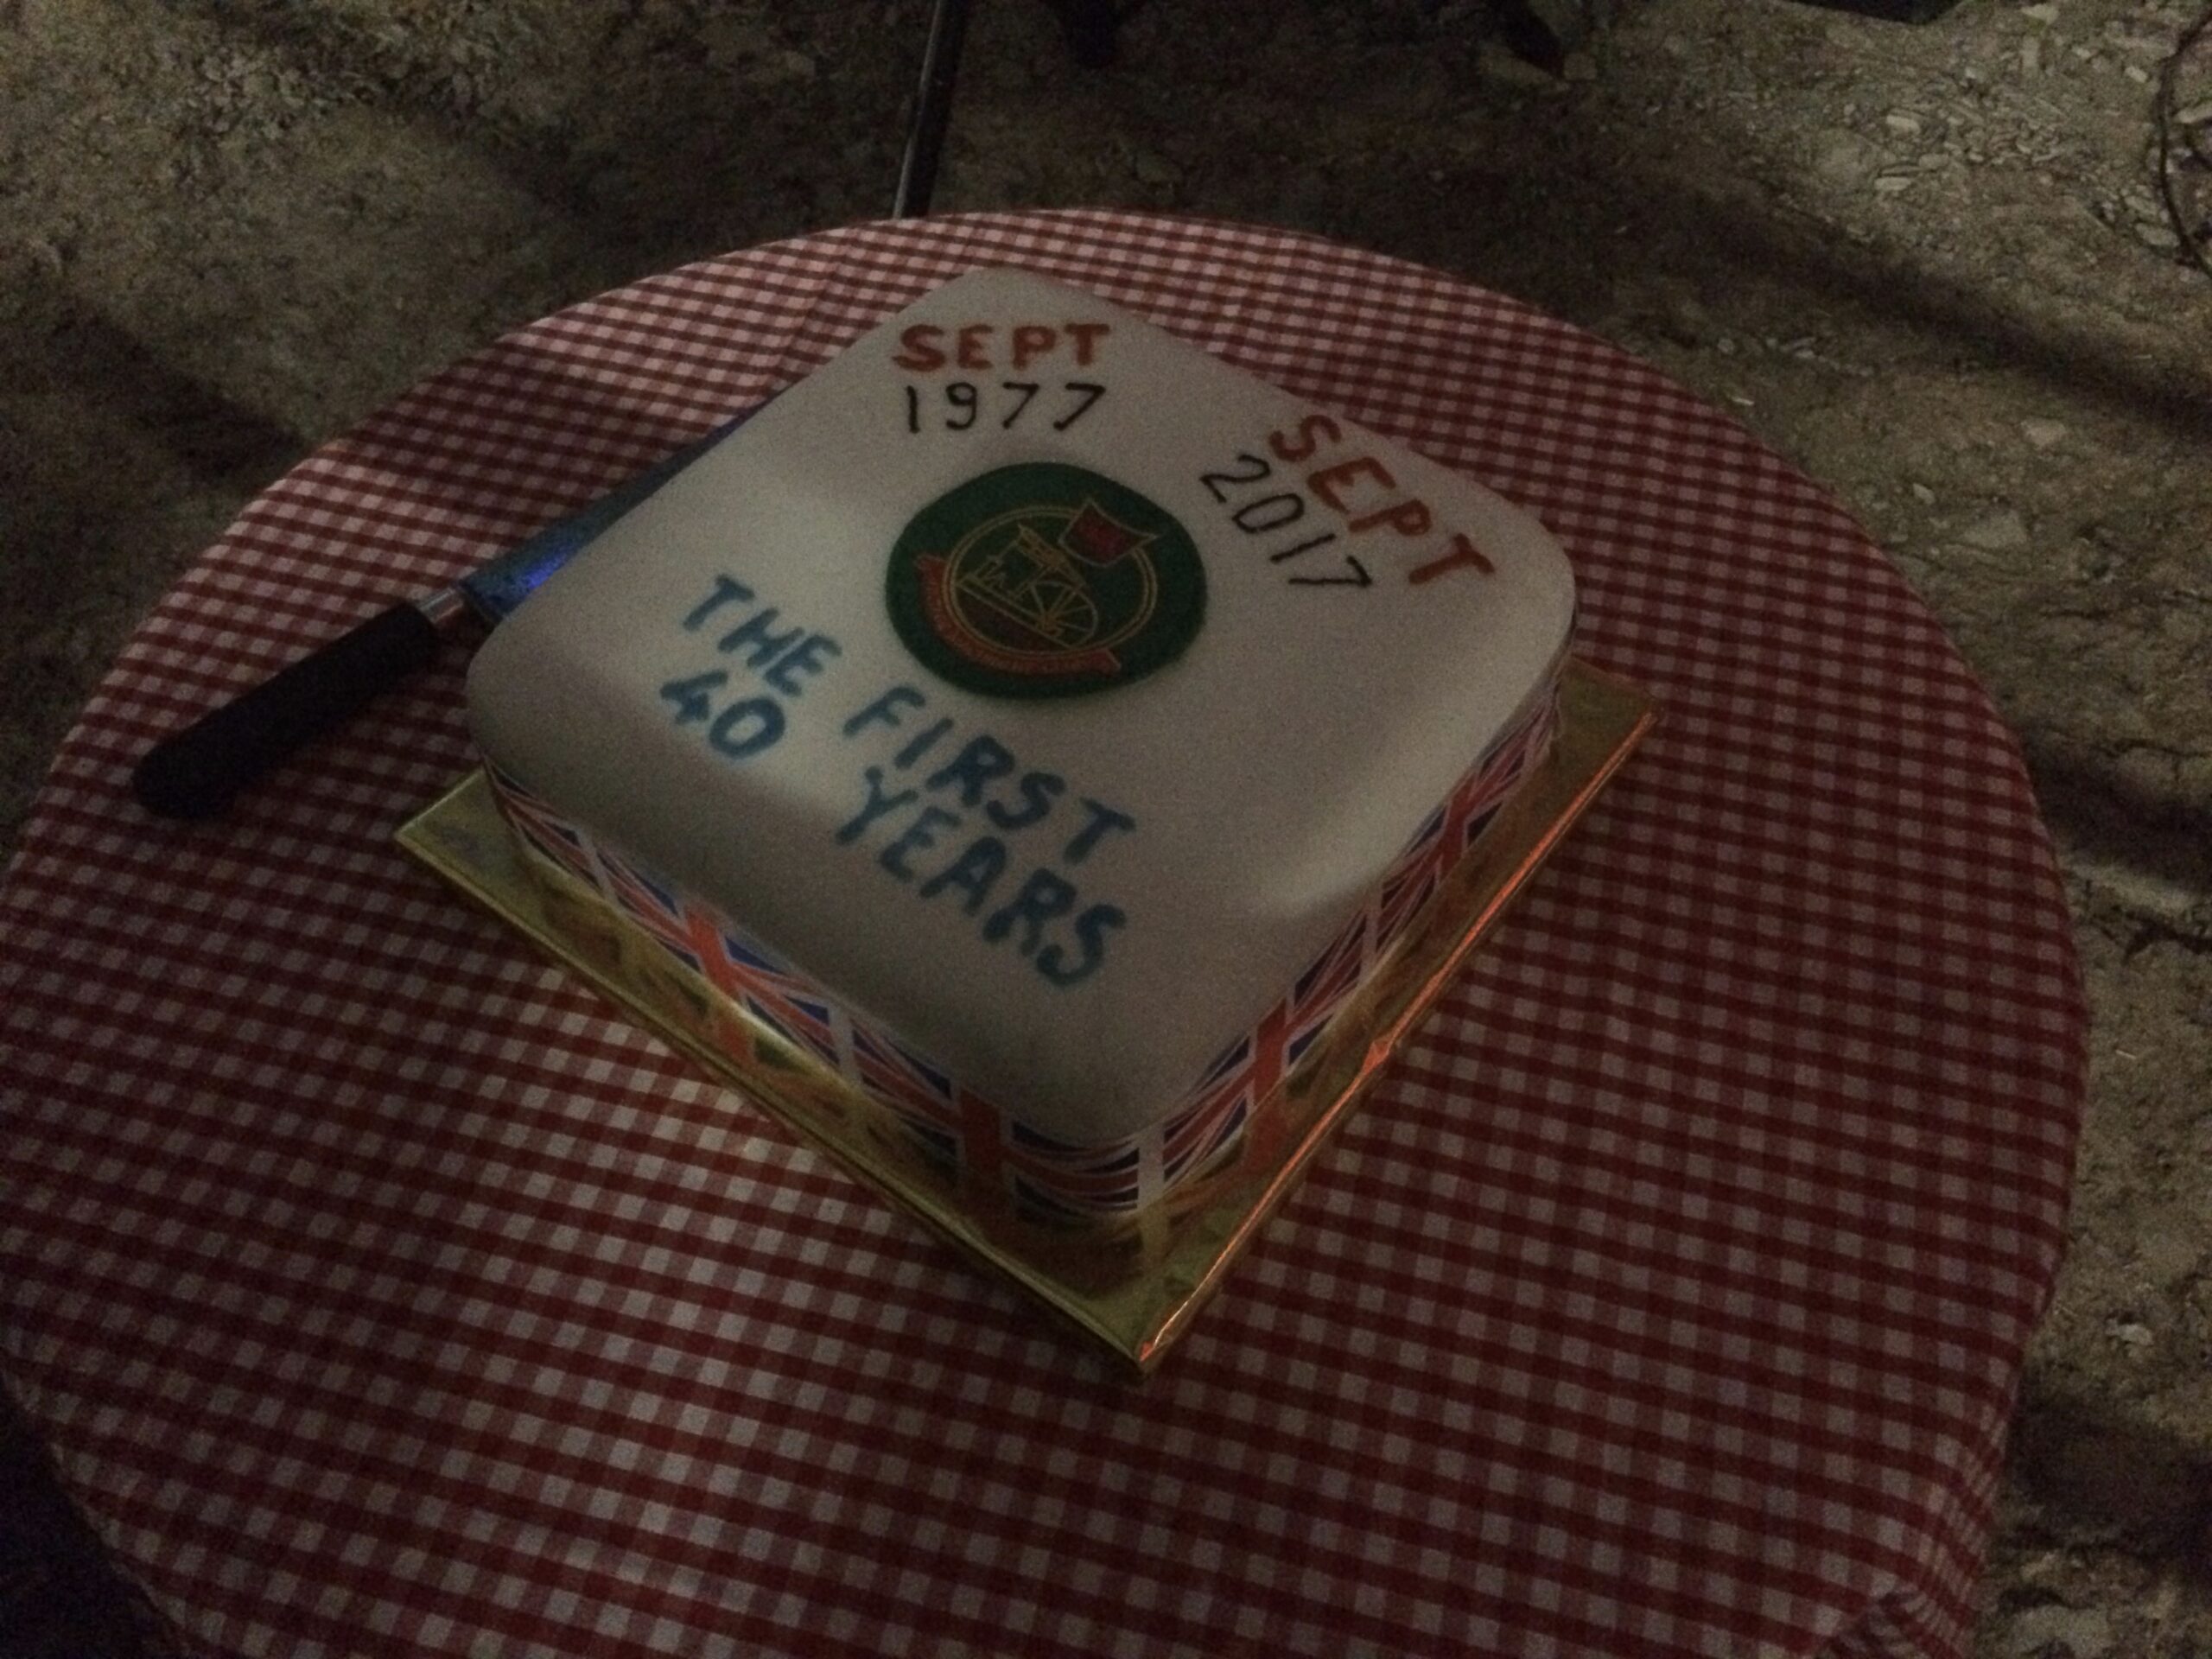 A birthday cake, with decoration icing, the first 40 years.